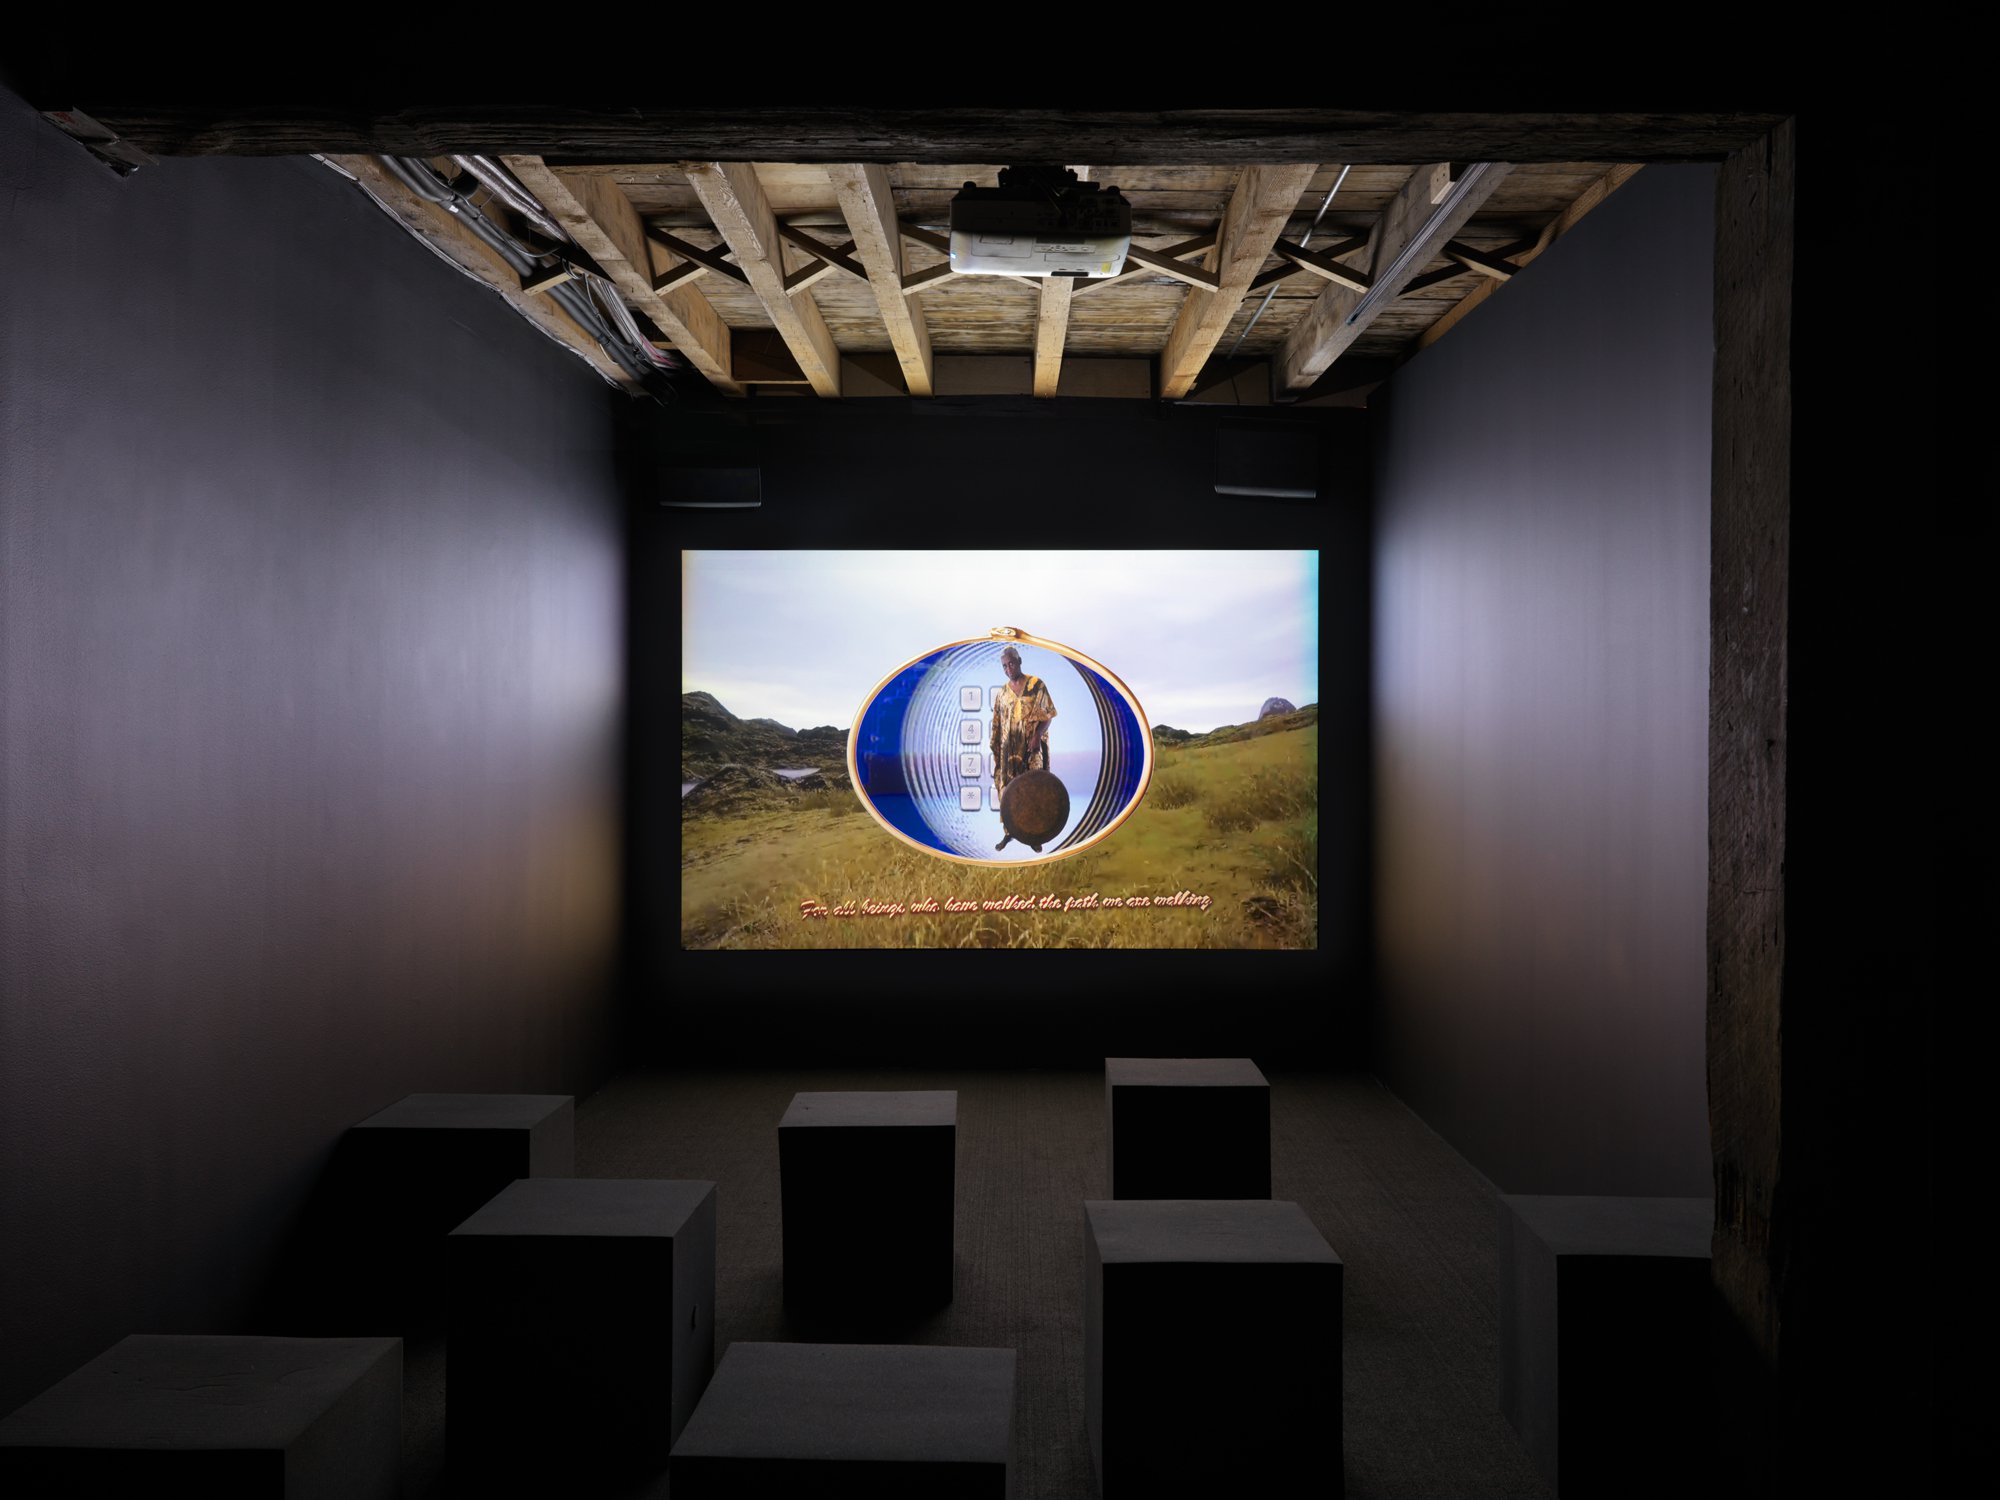 Photo of a small dark art gallery theater. Projected onto the wall is a valley behind a golden ring opening to a blue cyberverse portal. A person wearing an African print garment holds a heavy instrument inside the portal.